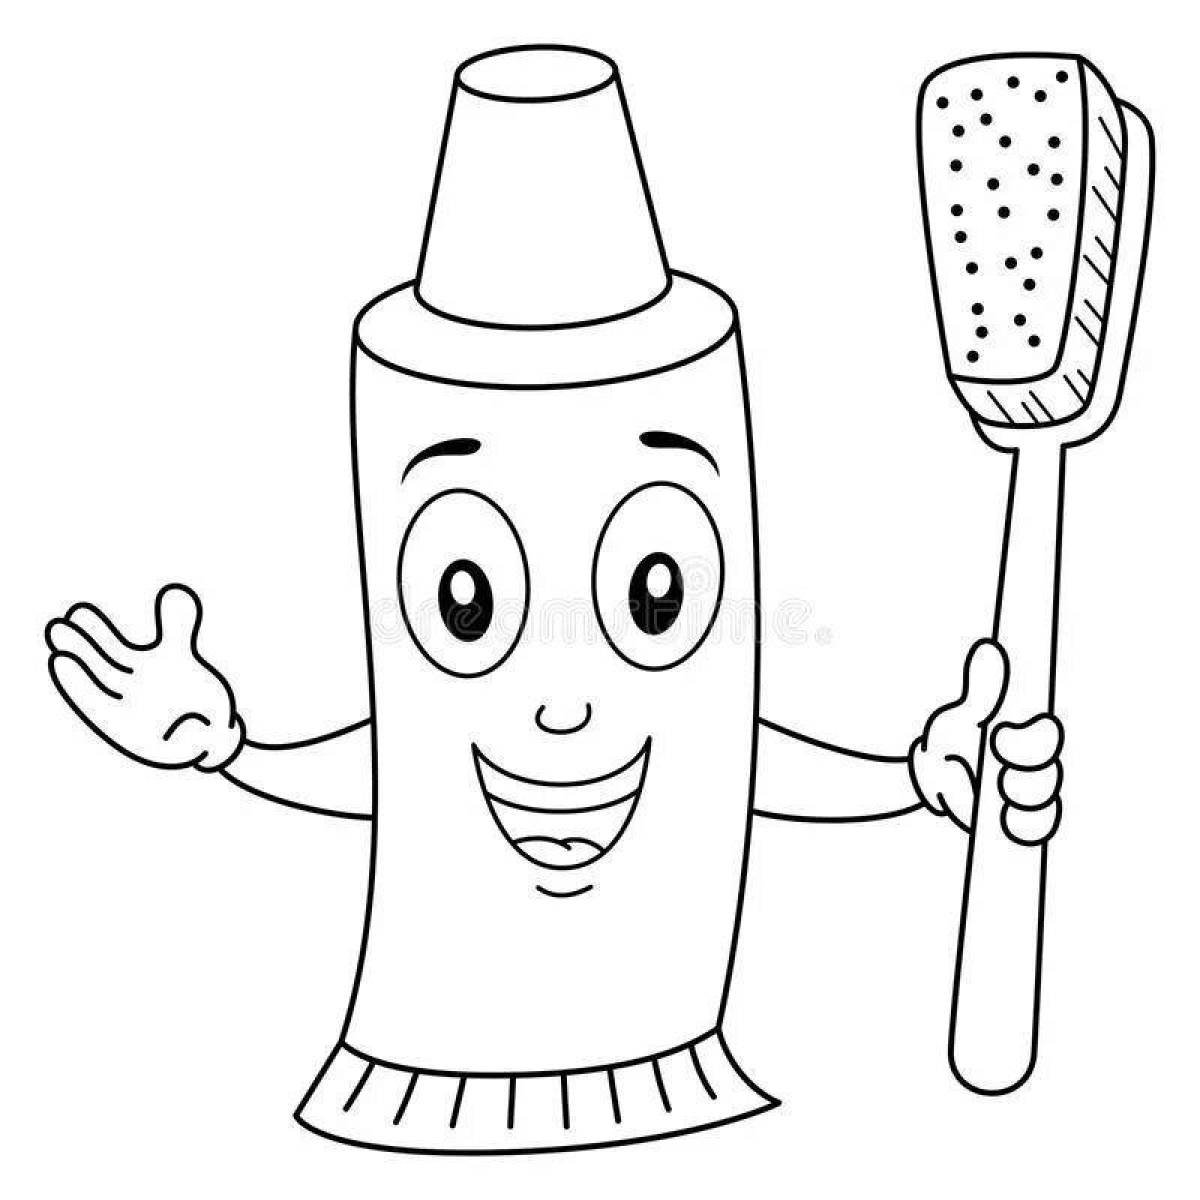 Greasy toothbrush and toothpaste coloring page